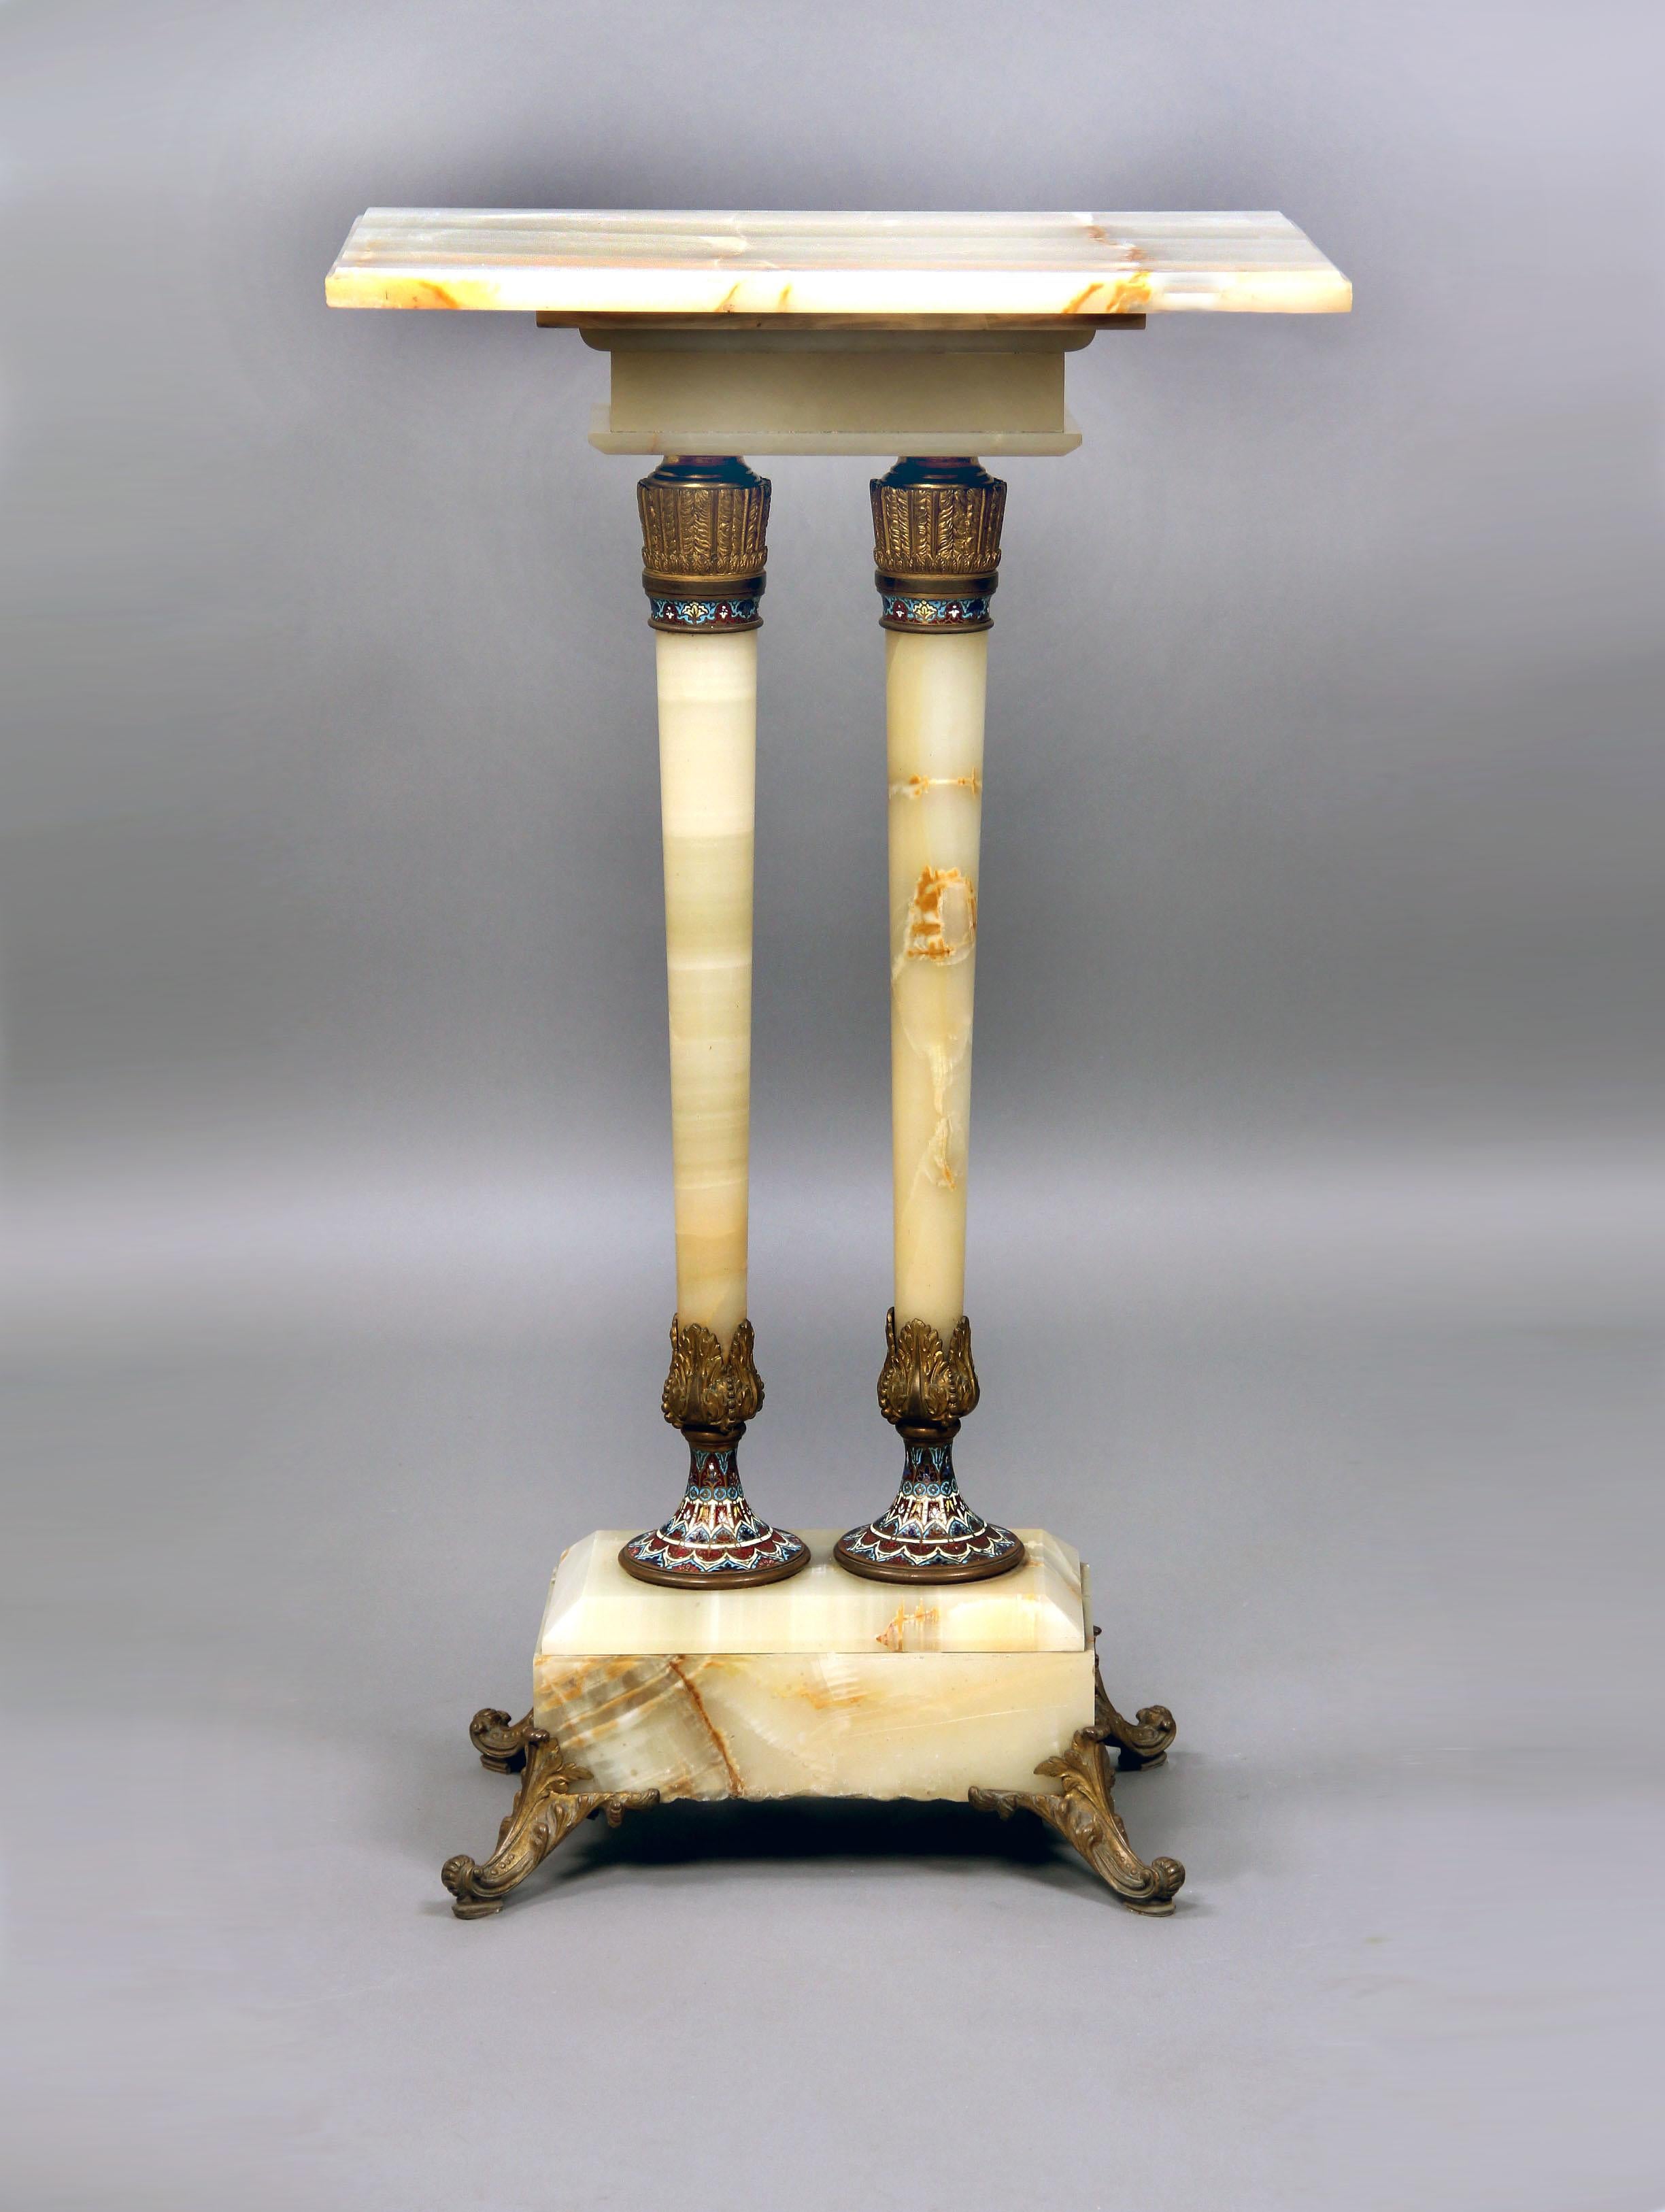 Late 19th Century Gilt Bronze and Champleve Enamel Mounted Onyx Pedestal

Rectangle onyx top above a pair of gilt bronze and French enamel pillars leading down to similarly decorated bronze and enamel designs, standing on a onyx base with four